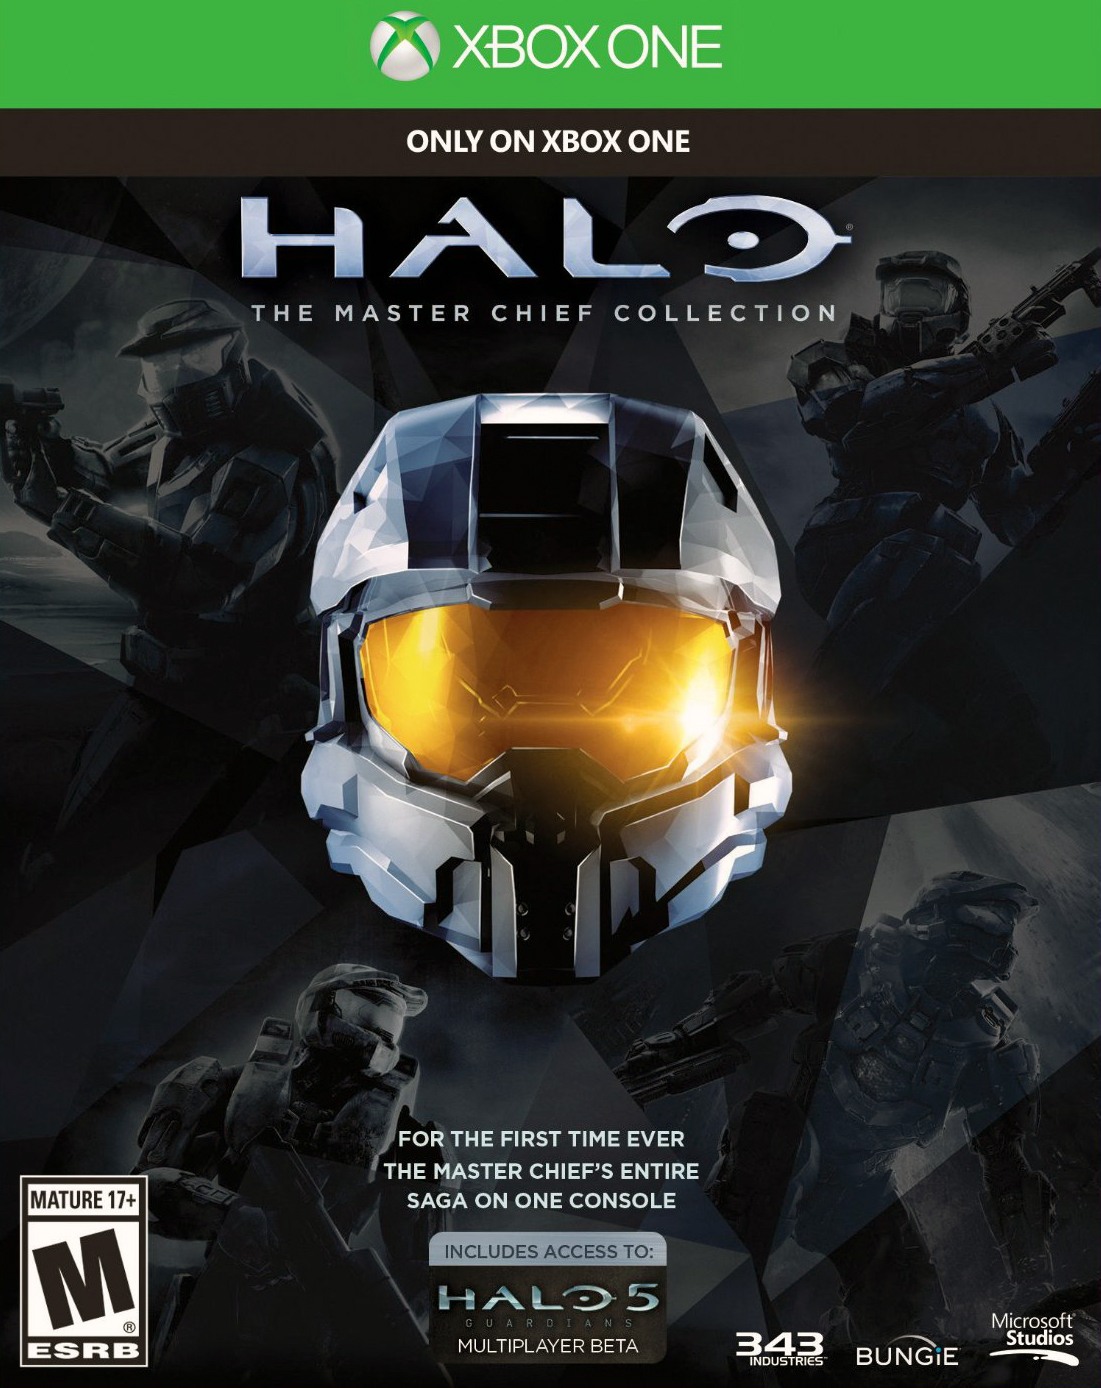 Relive the greatest adventures of the ultimate solder with Halo: The Master Chief Collection, which includes the complete story of the Master Chief on one console for the first time ever. Halo: Combat Evolved , Halo 2, Halo 3 and Halo 4 are all packed into this massive package. And not only is the debut Halo delivered in its acclaimed Anniversary package, but for the first time, an entirely remastered version of the iconic sequel that revolutionized online console gaming is available with the Halo 2 Anniversary version of the game. This collection lets you experience Halo in an all-new way, at higher visual fidelity running at 60 frames per second (fps) on dedicated servers.  <p> Halo: The Master Chief Collection features curated campaign and multiplayer playlists across all four games and features more than 100 multiplayer maps -- authentic to their original release. In addition, Halo 2 Anniversary includes six all-new maps built from the ground up for Xbox One.